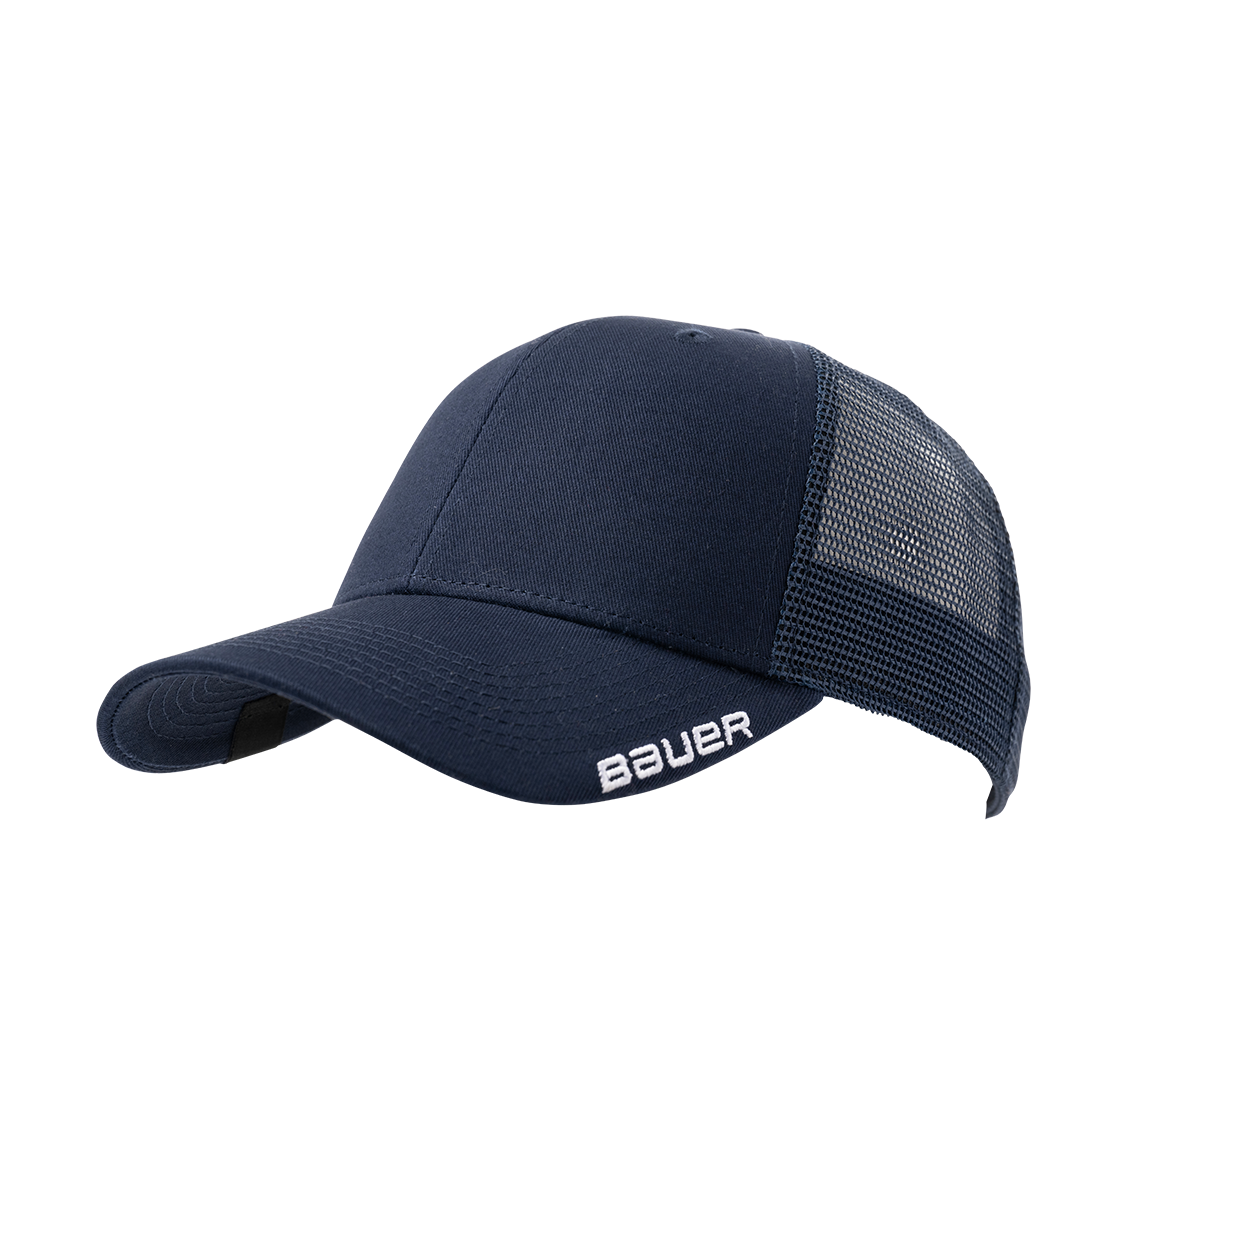 BAUER TEAM MESH SNAPBACK YOUTH